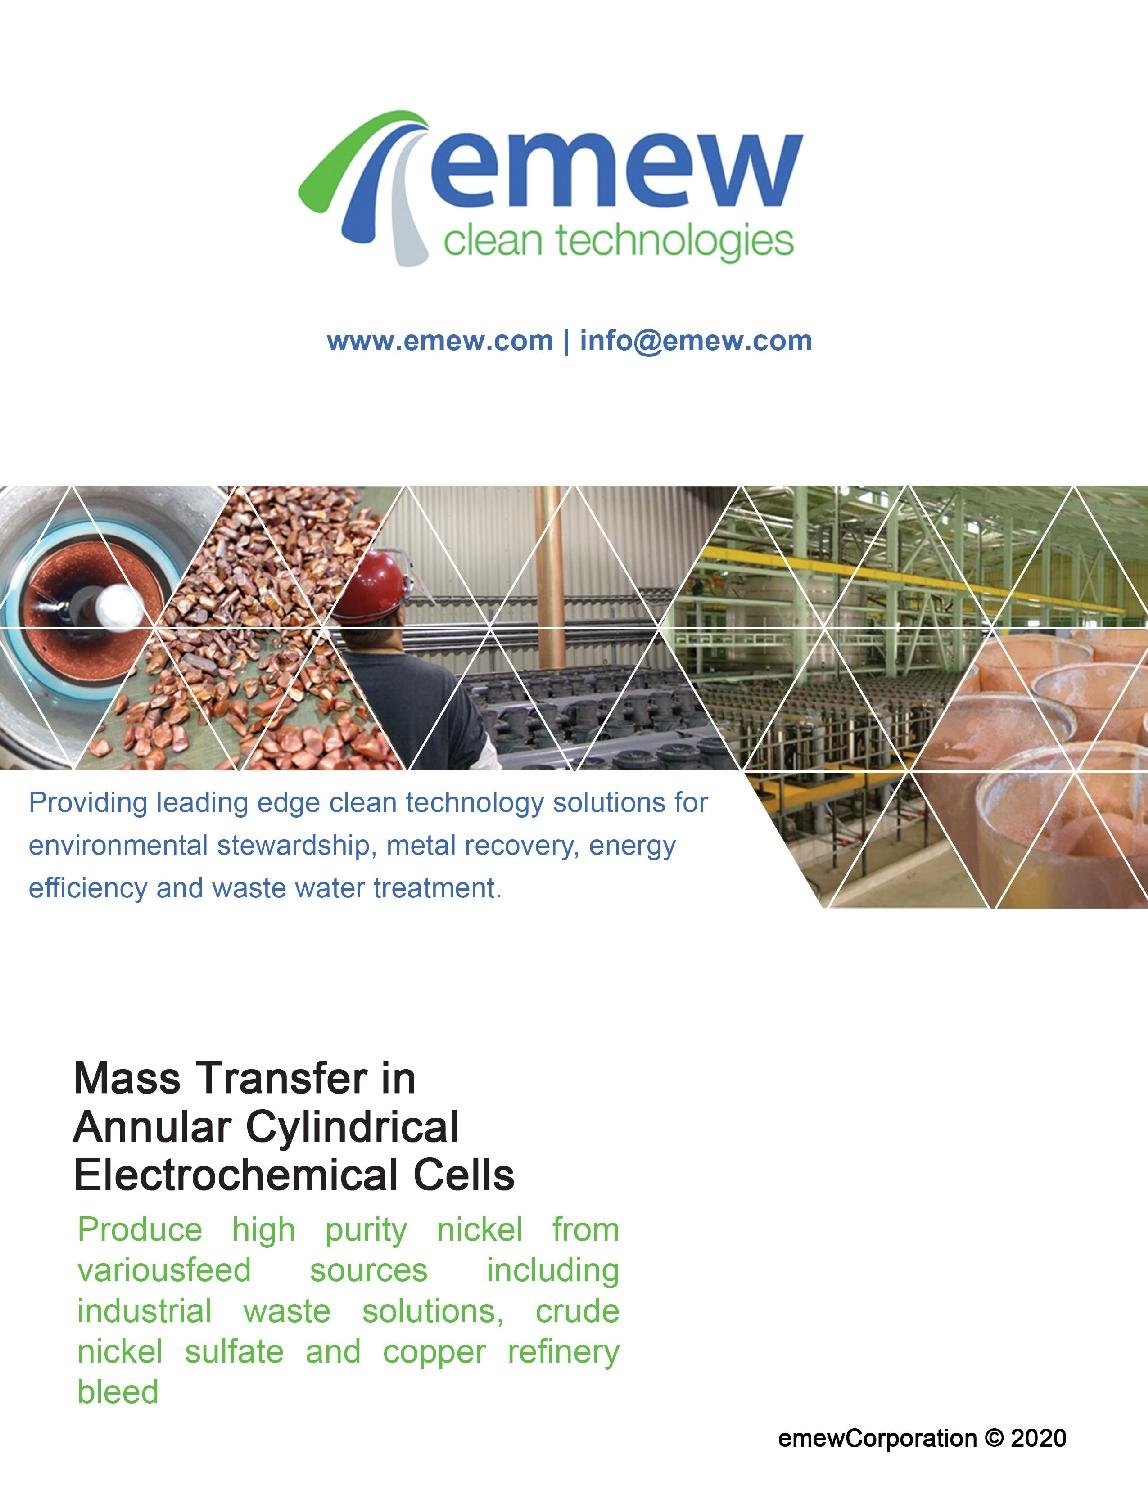 Mass Transfer in Annular Cylindrical Electrochemical Cells